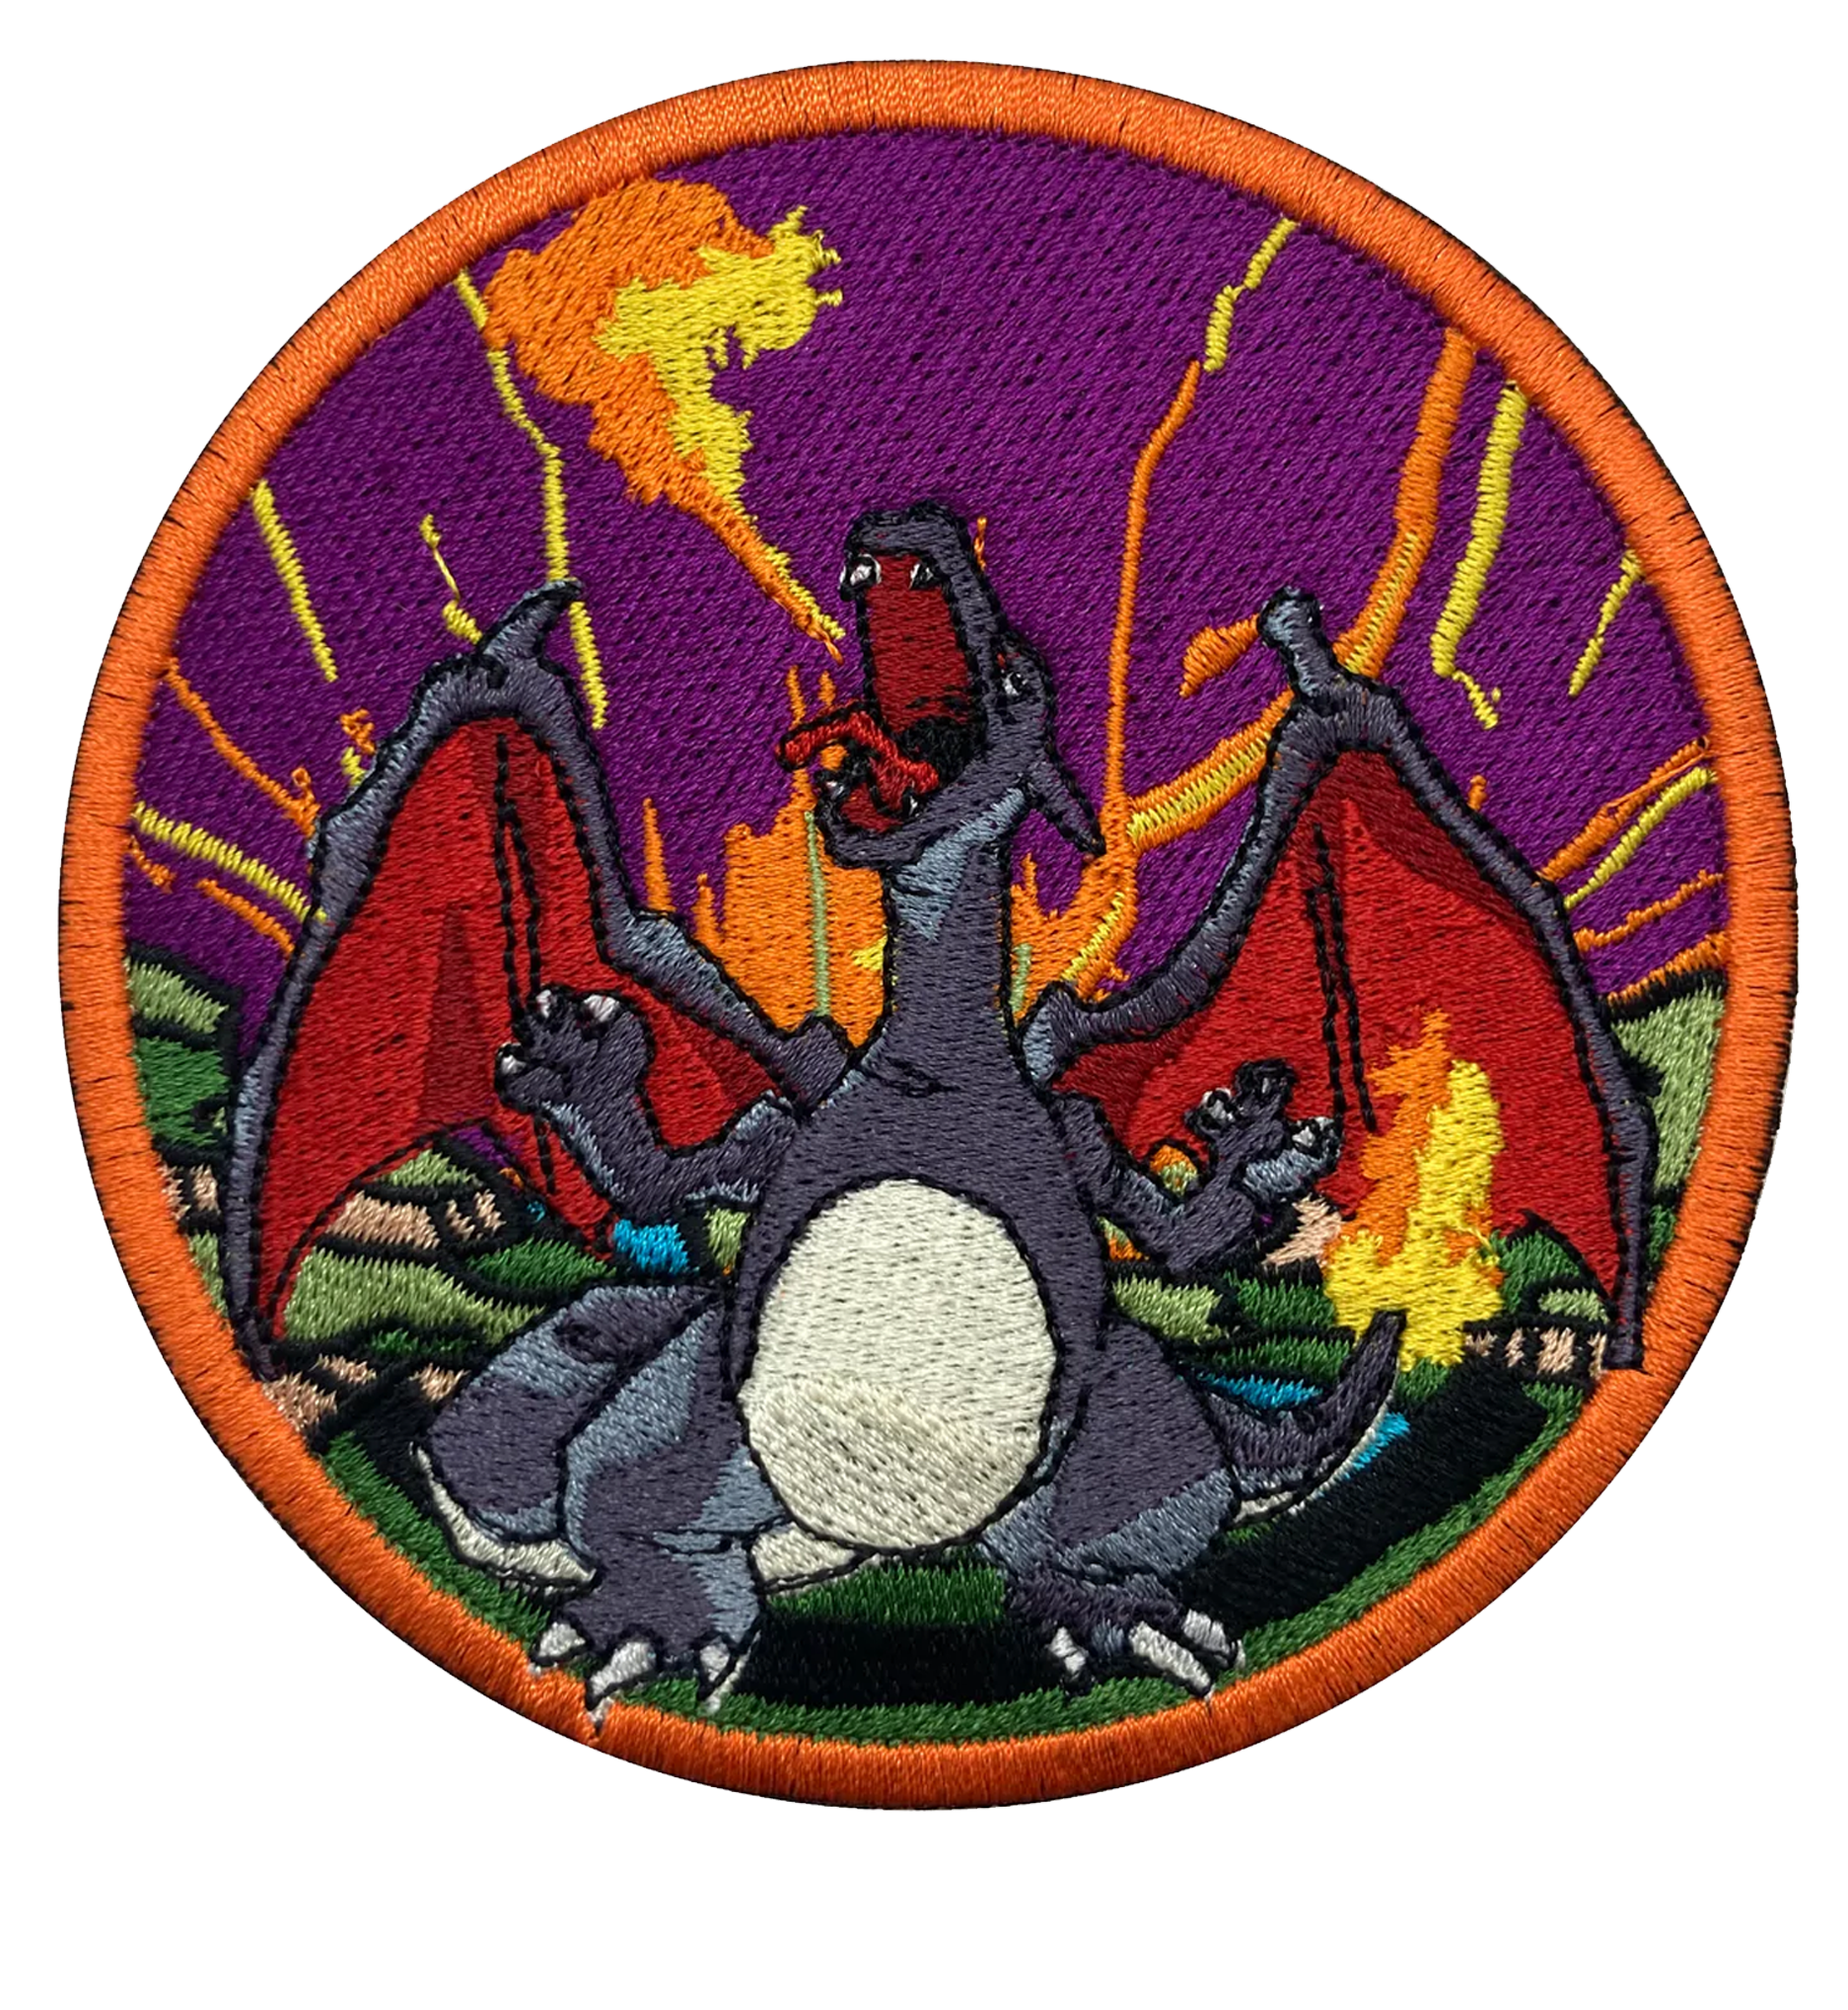 Mega Charizard Y - Iron on patch - Shiny Metallic Embroidered. Pokemon  patch.